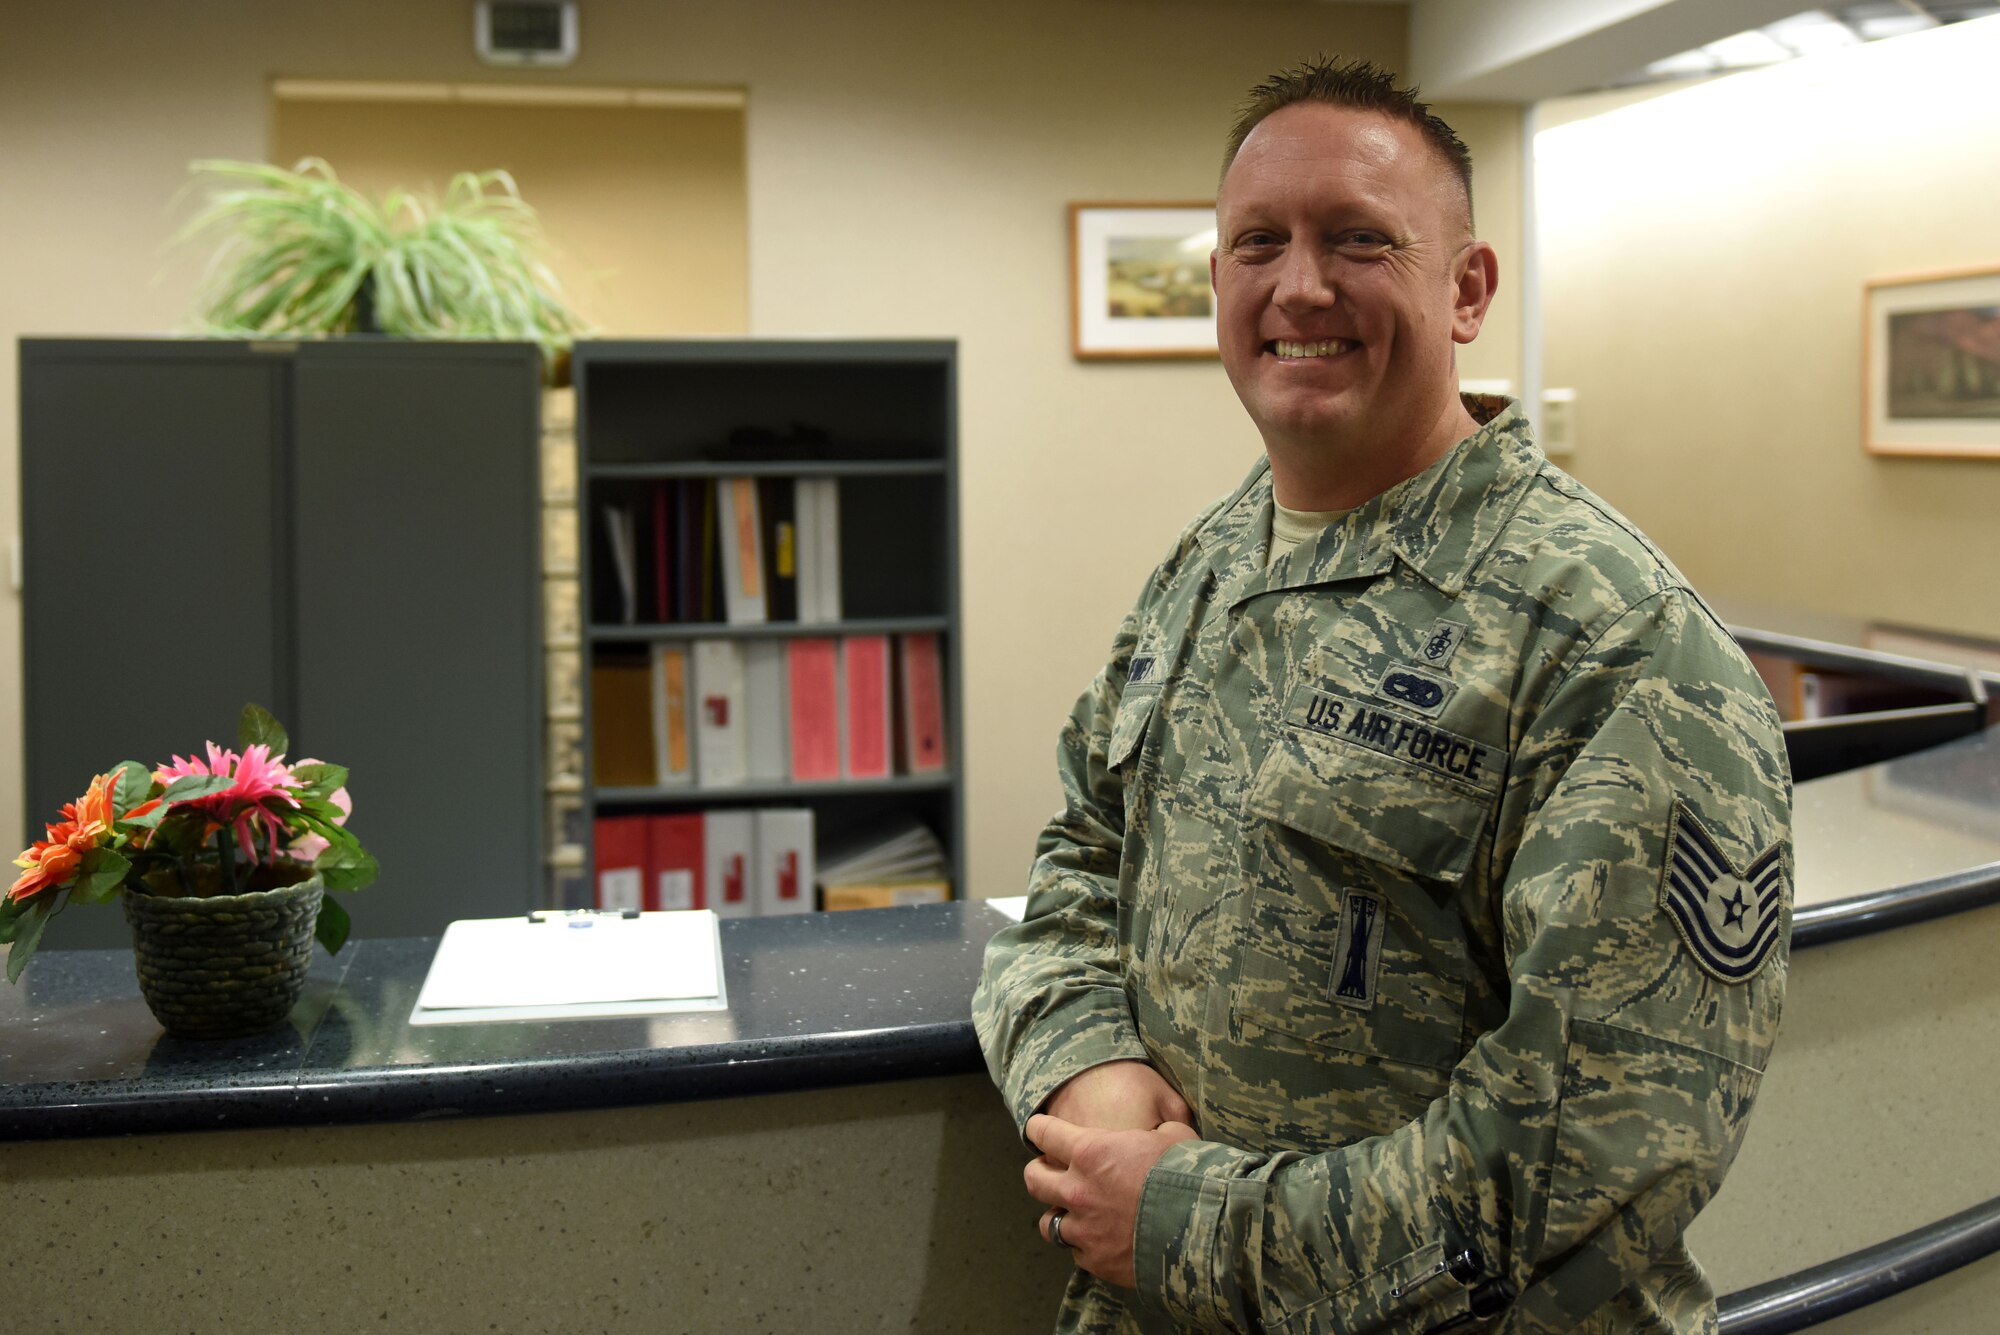 A man in the Airman Battle Uniform stands in front of a desk.